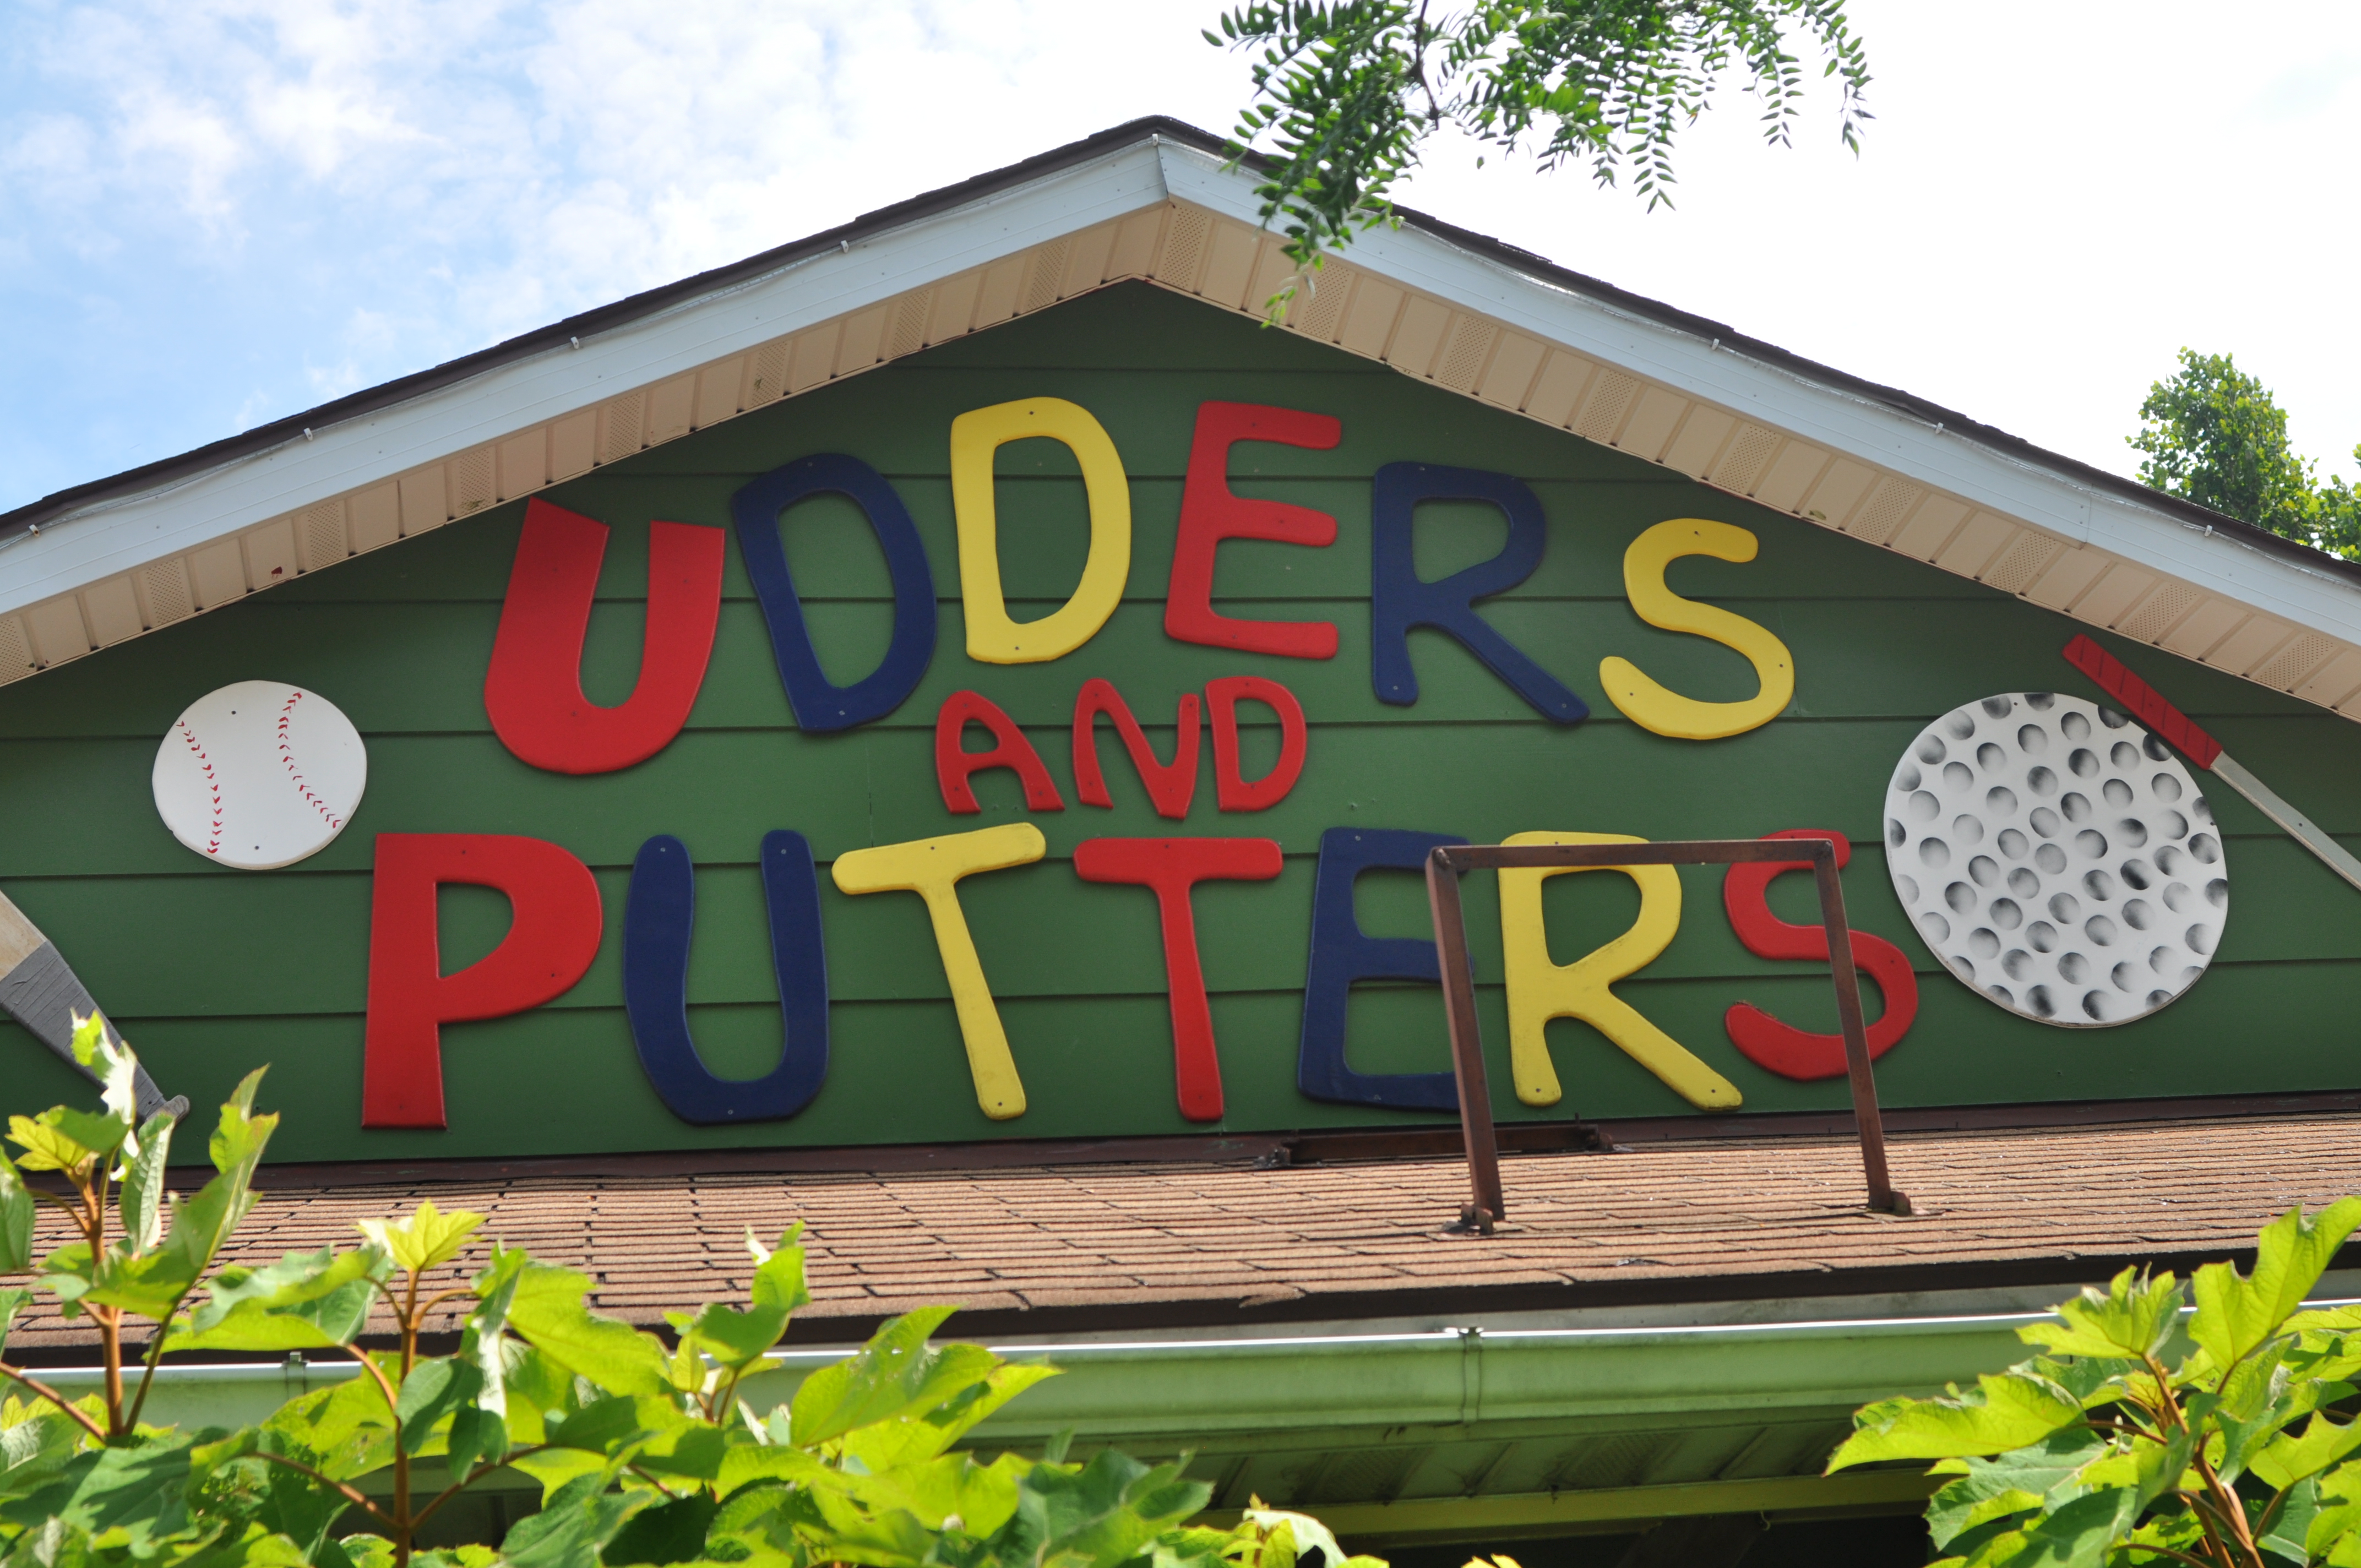 Udders Putters